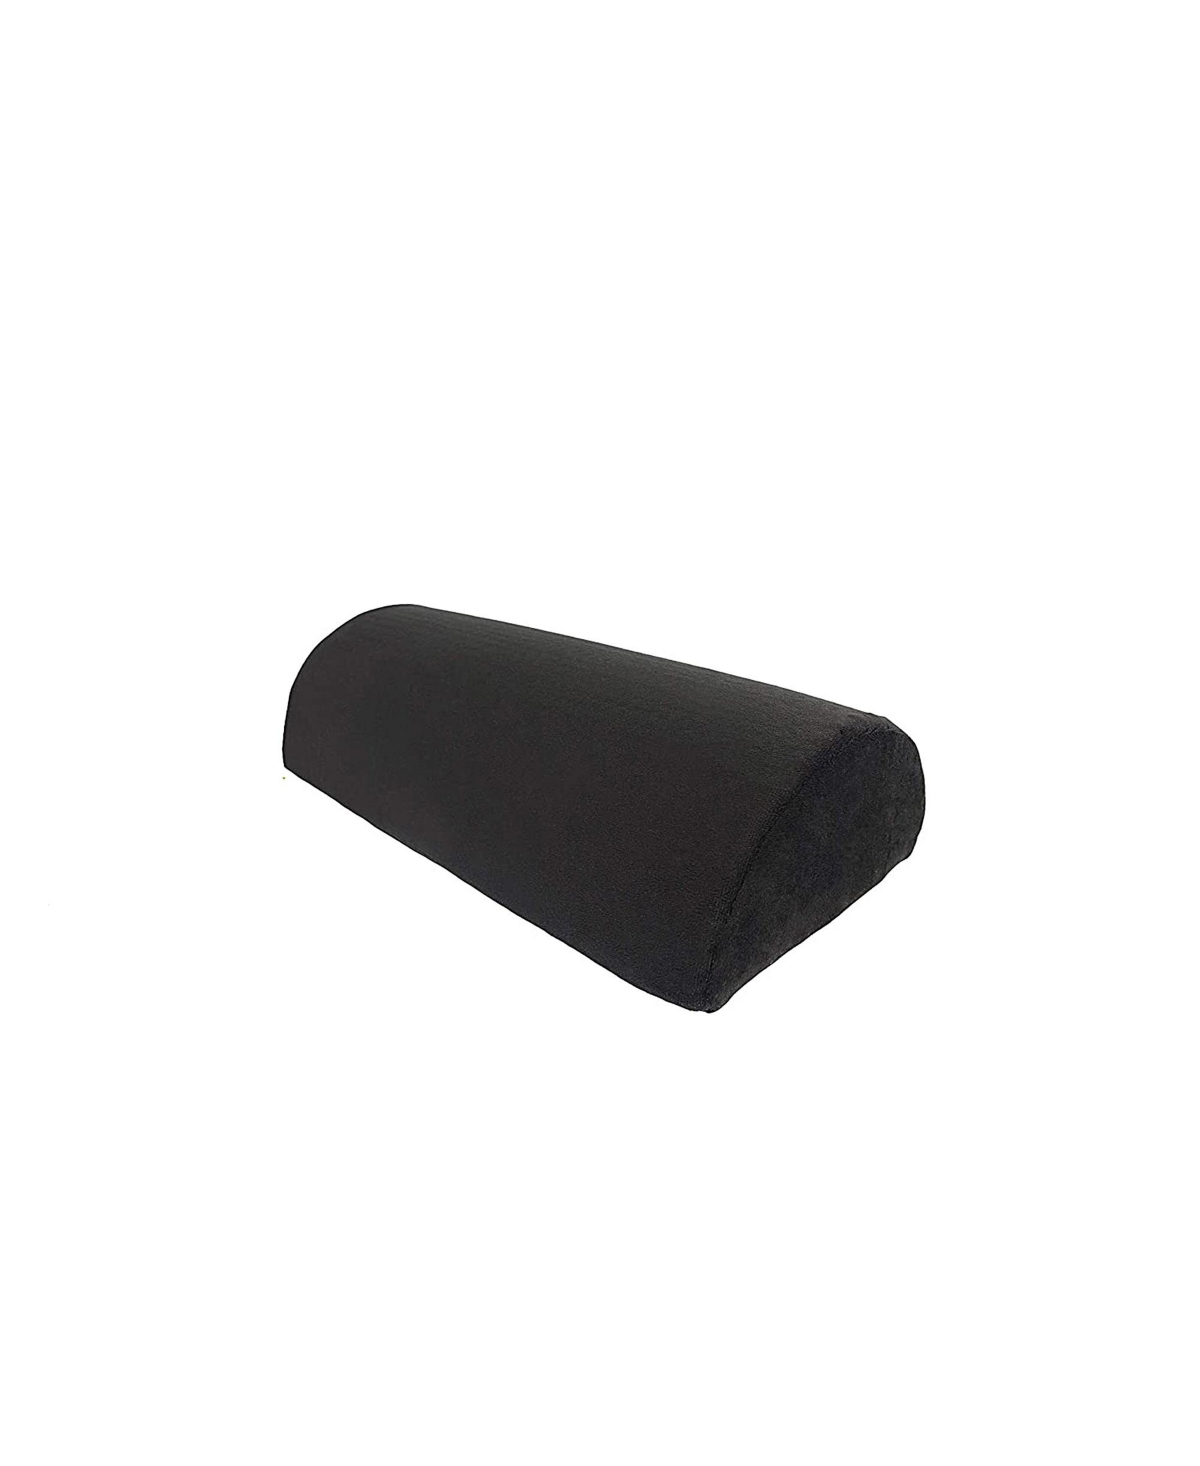 Dr Pillow Anbocare In Black